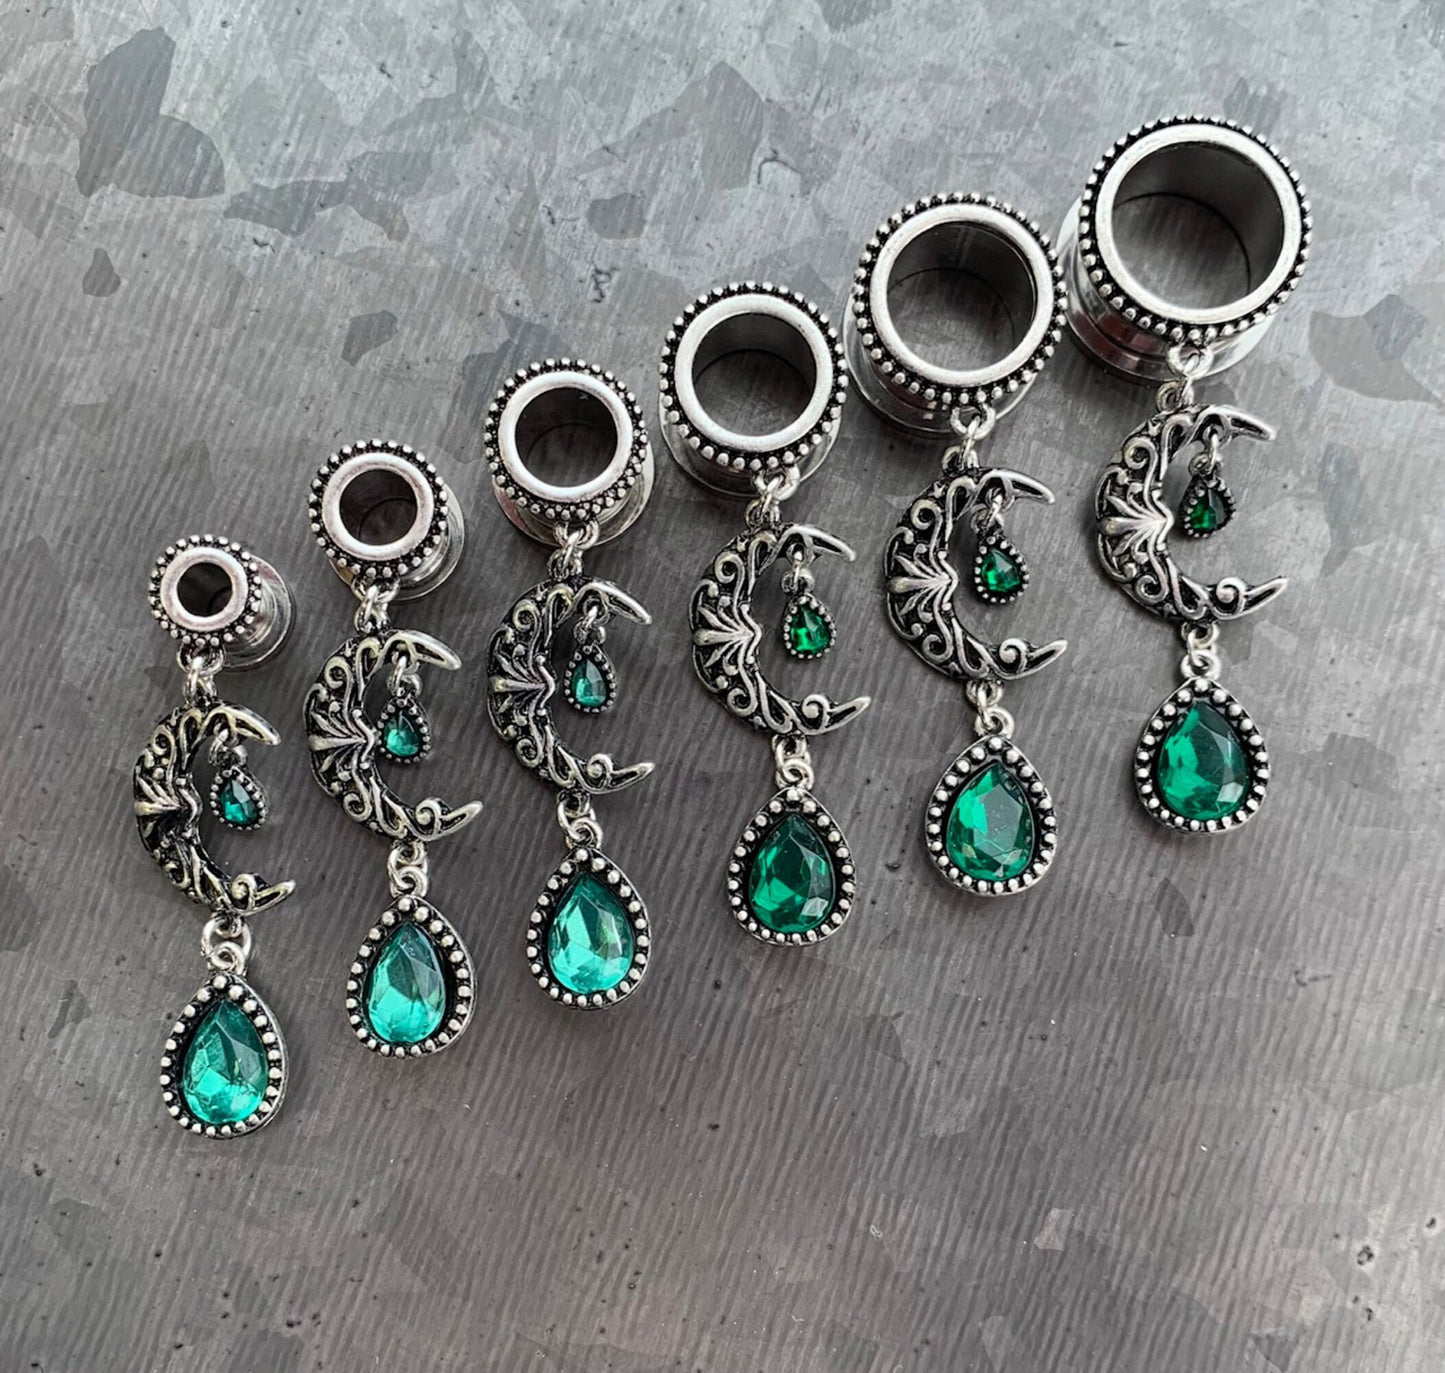 PAIR of Unique Emerald Green Stone Moon Dangle Screw Fit Tunnels/Plugs - Gauges 2g (6mm) thru 5/8" (16mm) available!